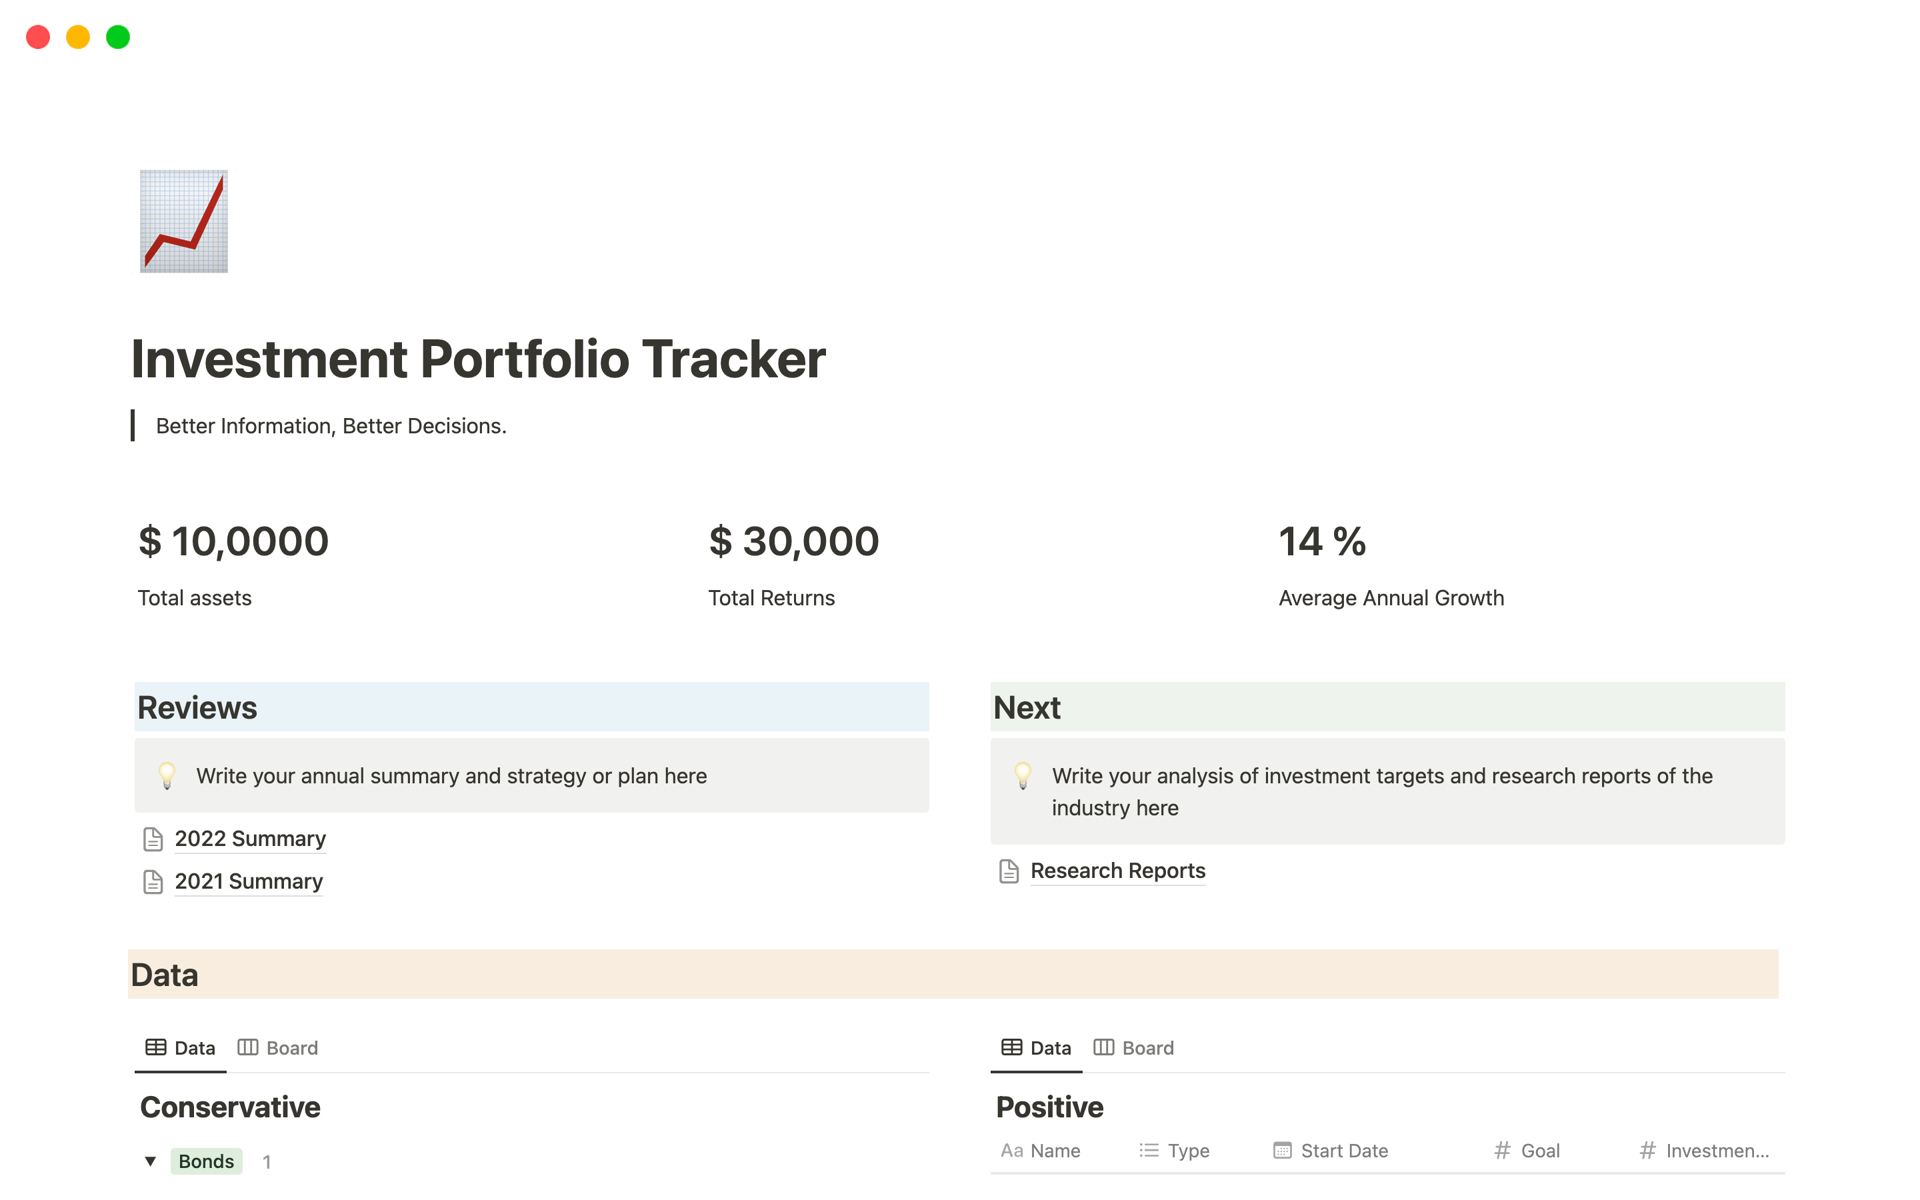 Keep track of your investments & make better decisions

Transform your financial journey with our Investment Portfolio Tracker Notion Template! Monitor assets, track returns, and plan strategically. Simplify conservative and high-risk investments effortlessly.